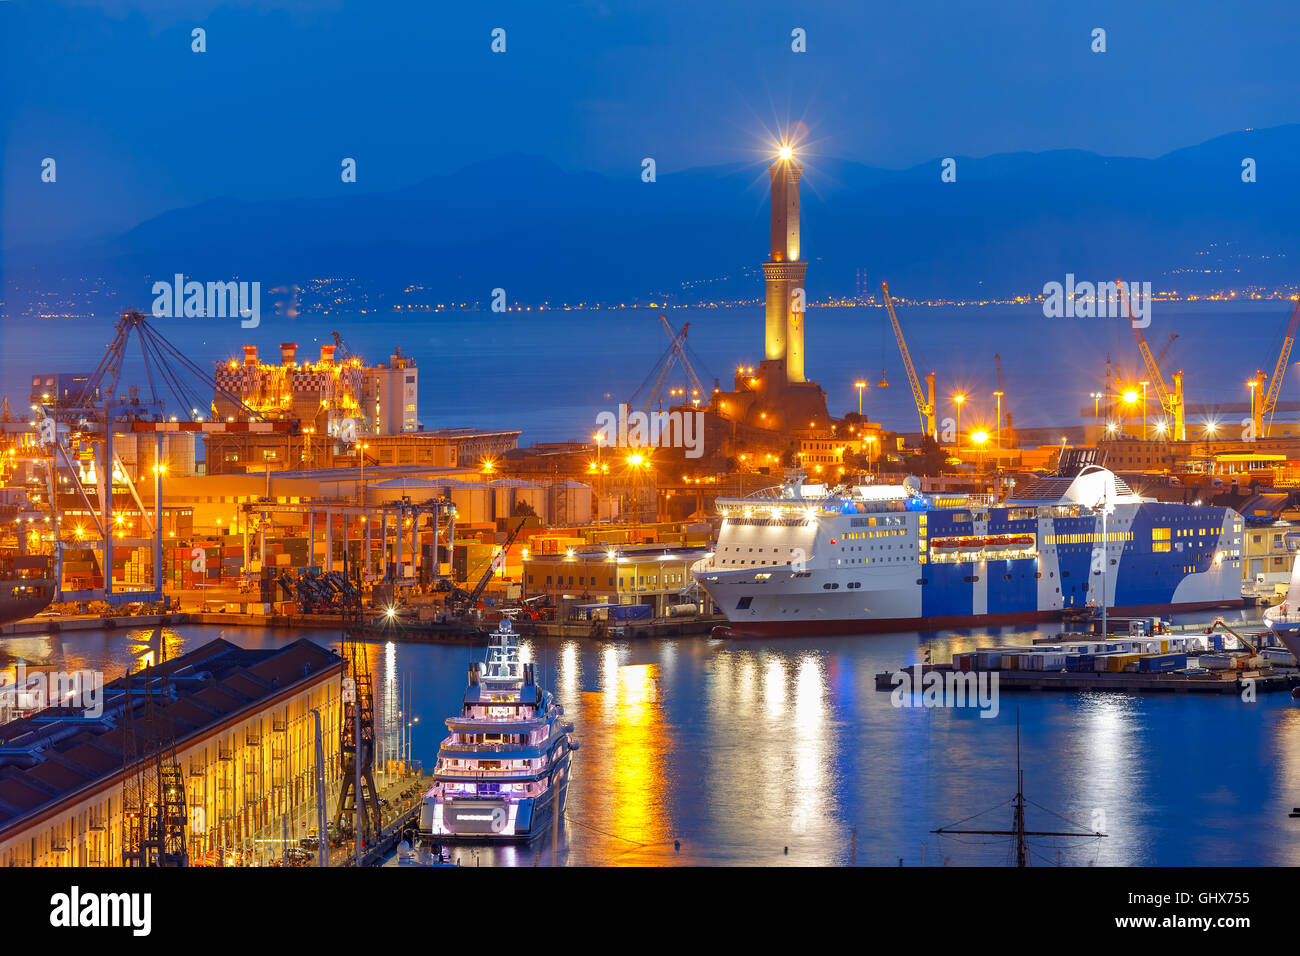 Old Lighthouse in port of Genoa at night, Italy. Stock Photo